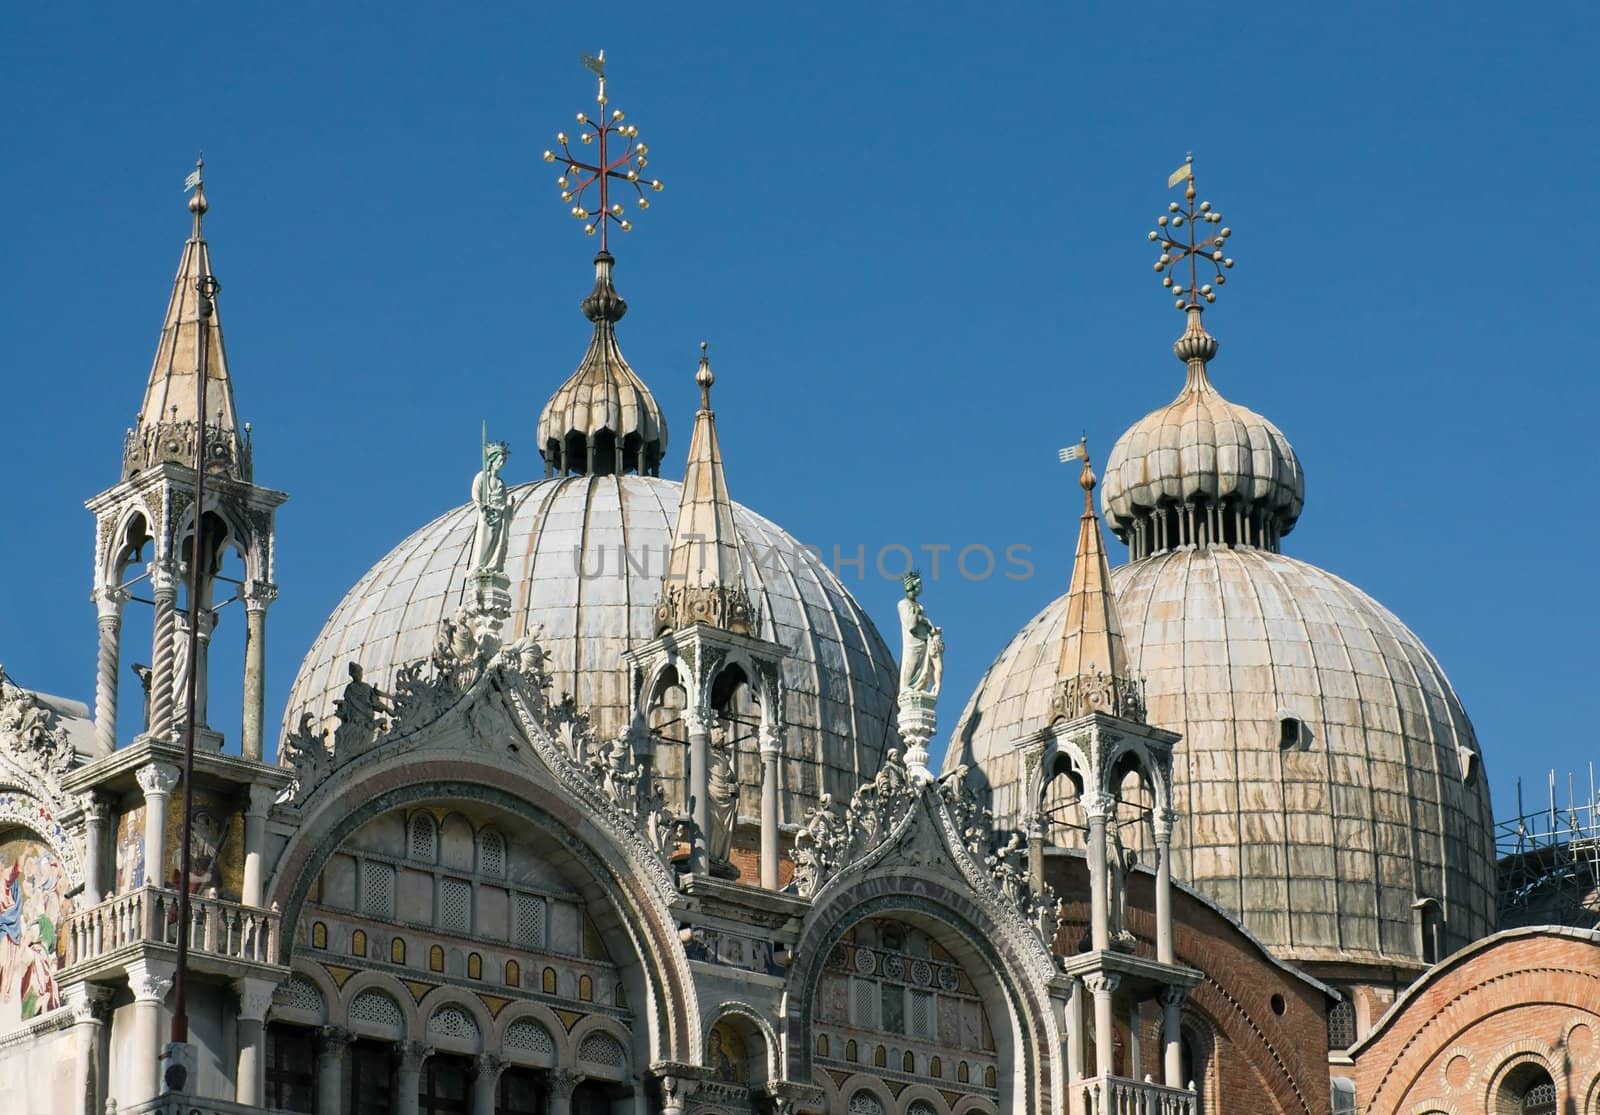 Domes and sculptures of the cathedral of San Marco in Venice